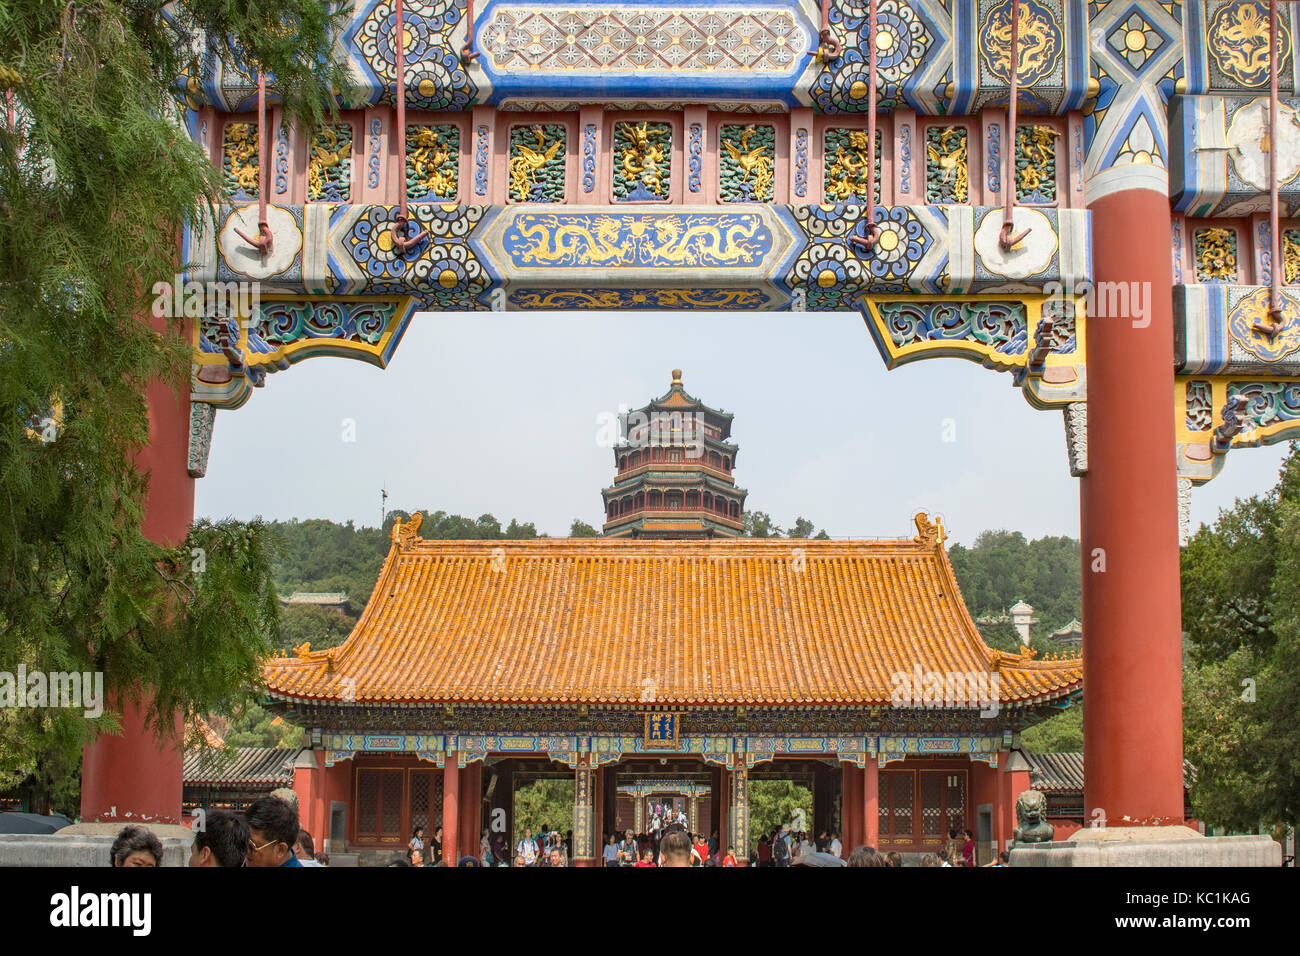 Glowing Clouds and Holyland Archway, Summer Palace, Beijing, China Stock Photo